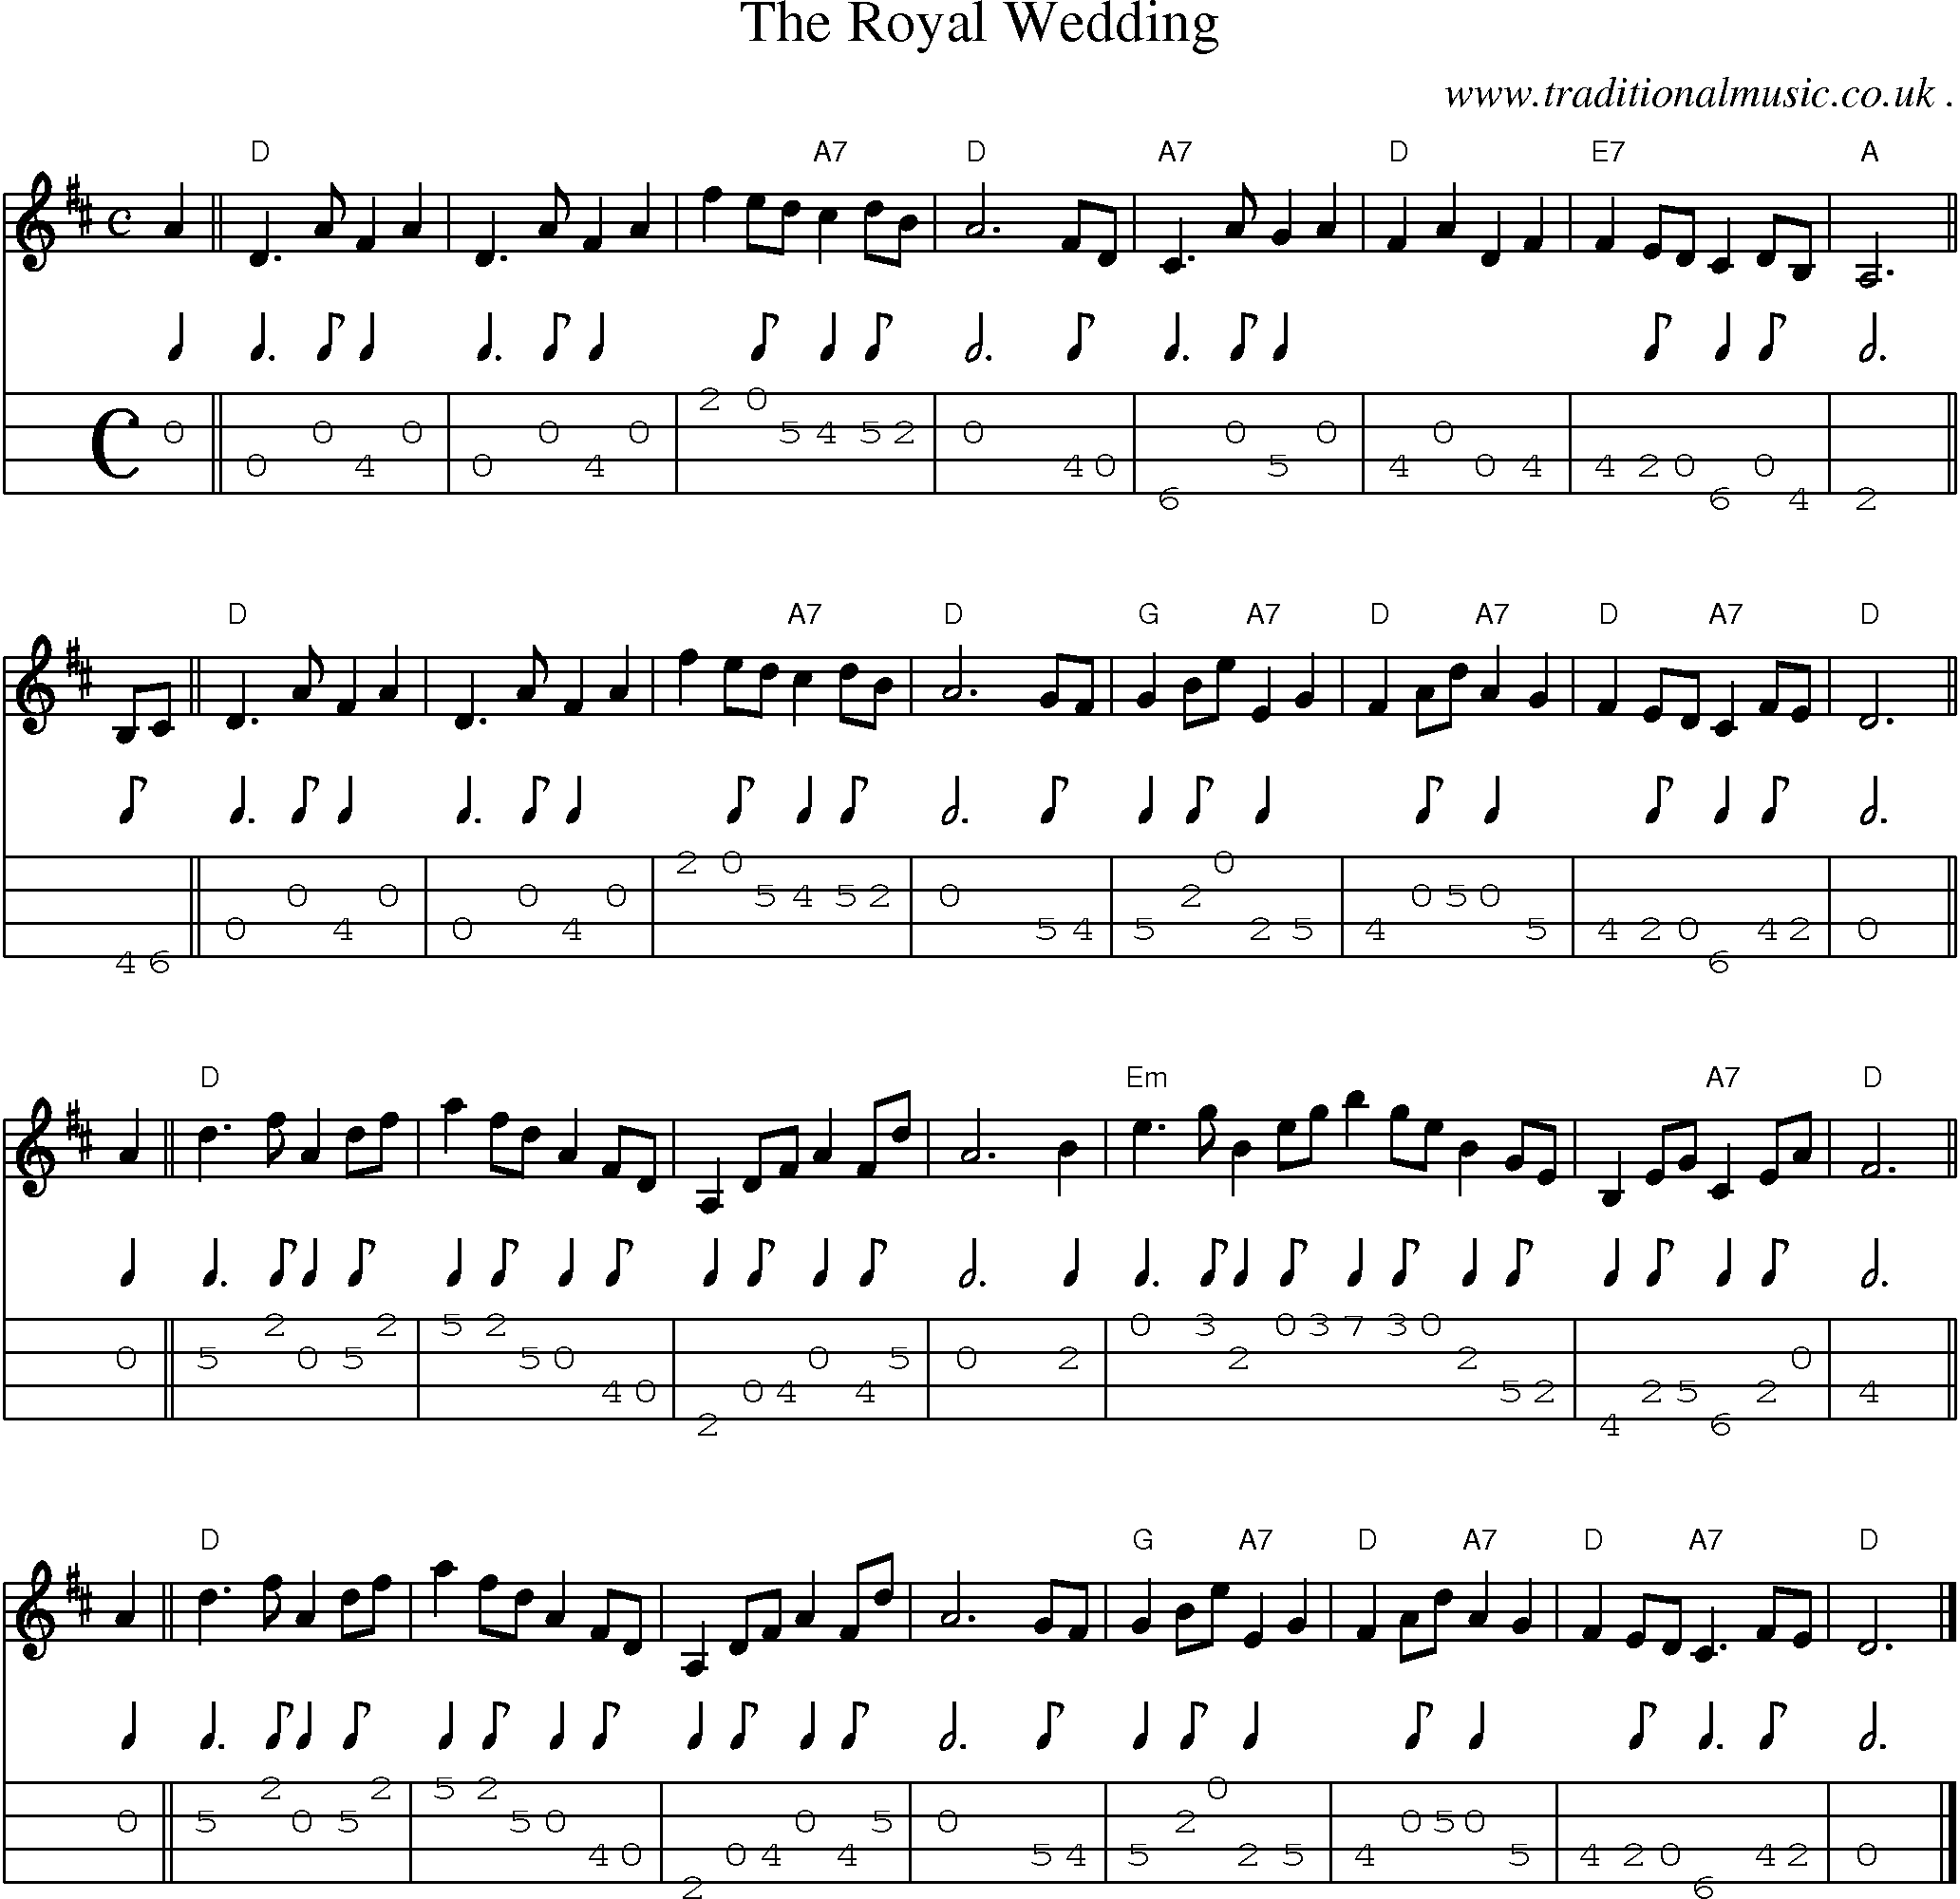 Sheet-music  score, Chords and Mandolin Tabs for The Royal Wedding